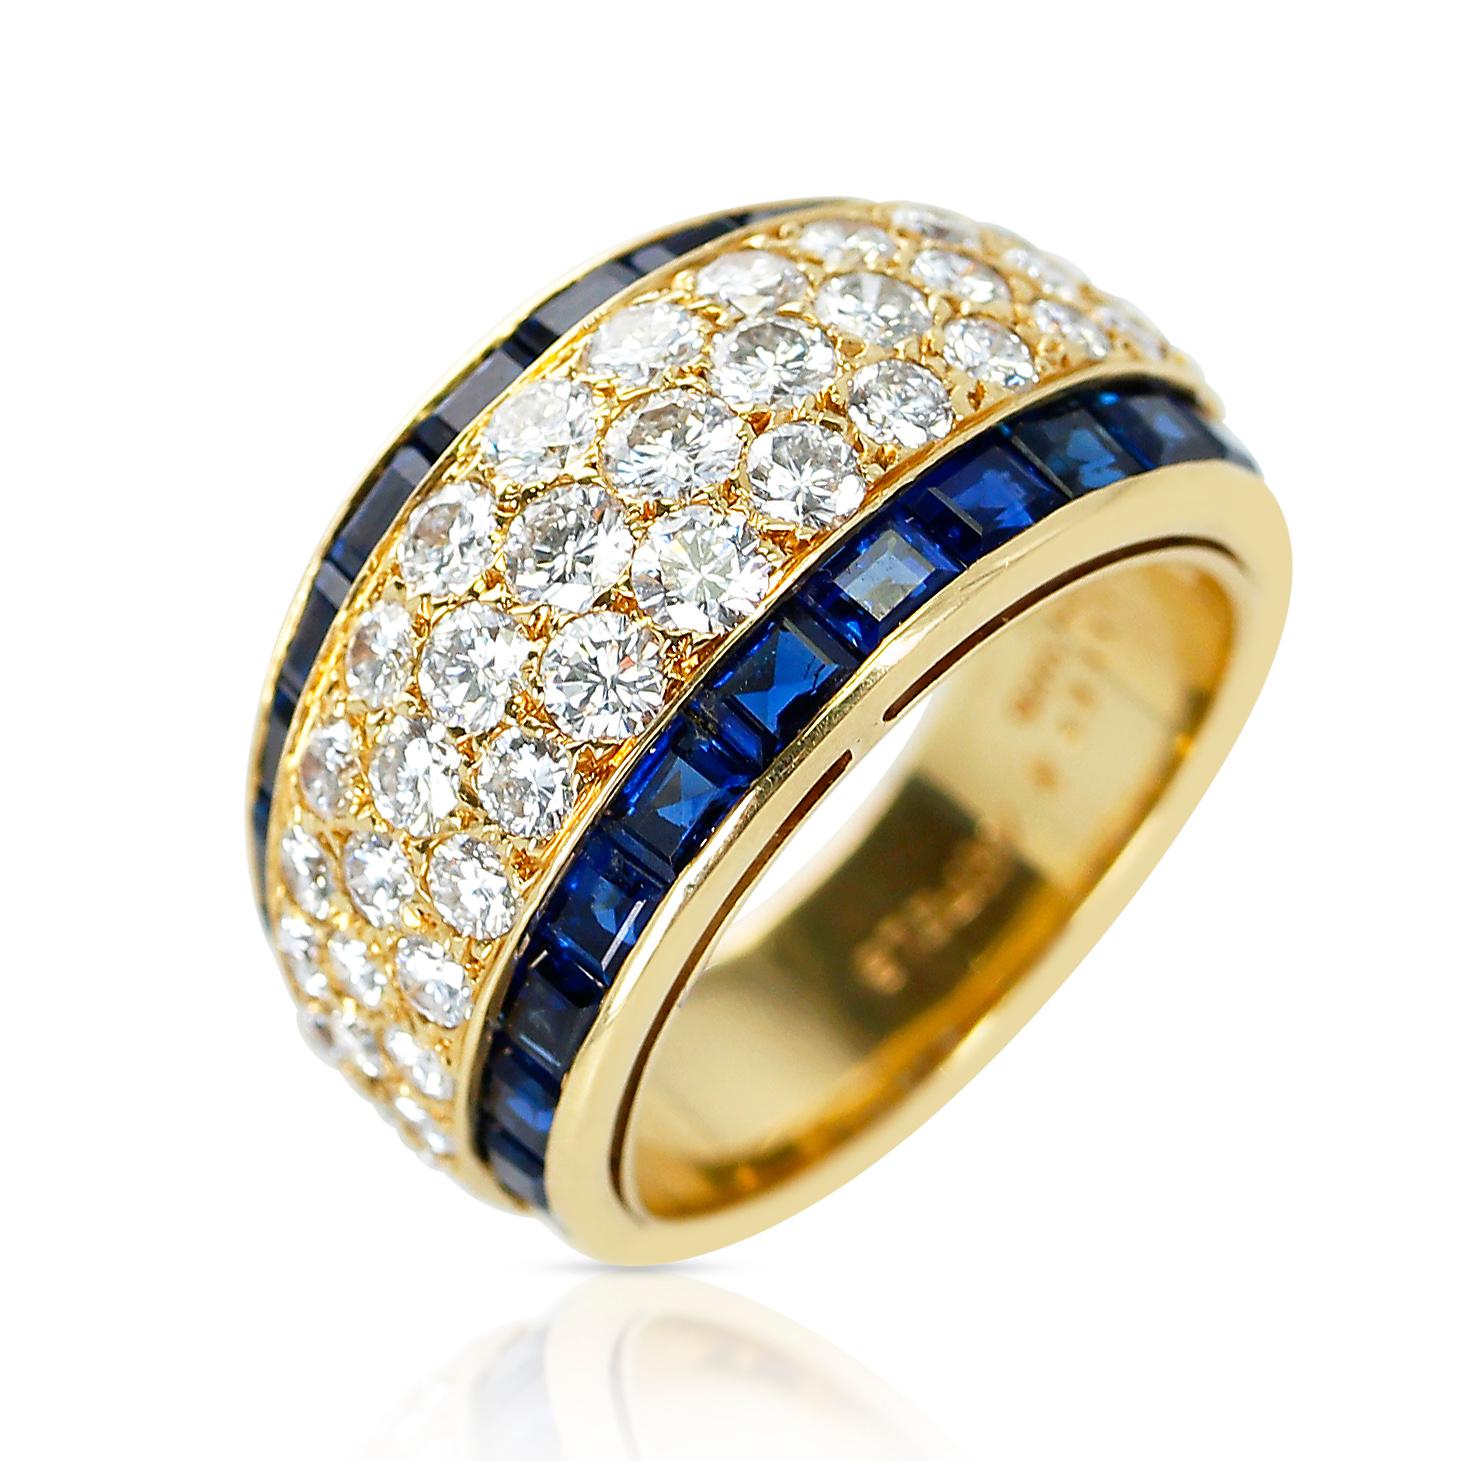 A Van Cleef & Arpels Three Row Diamond Ring with Invisibly Set Sapphires, made in France. 18 Karat Yellow Gold. Ring Size US 6. Total Weight: 9.37 grams. 